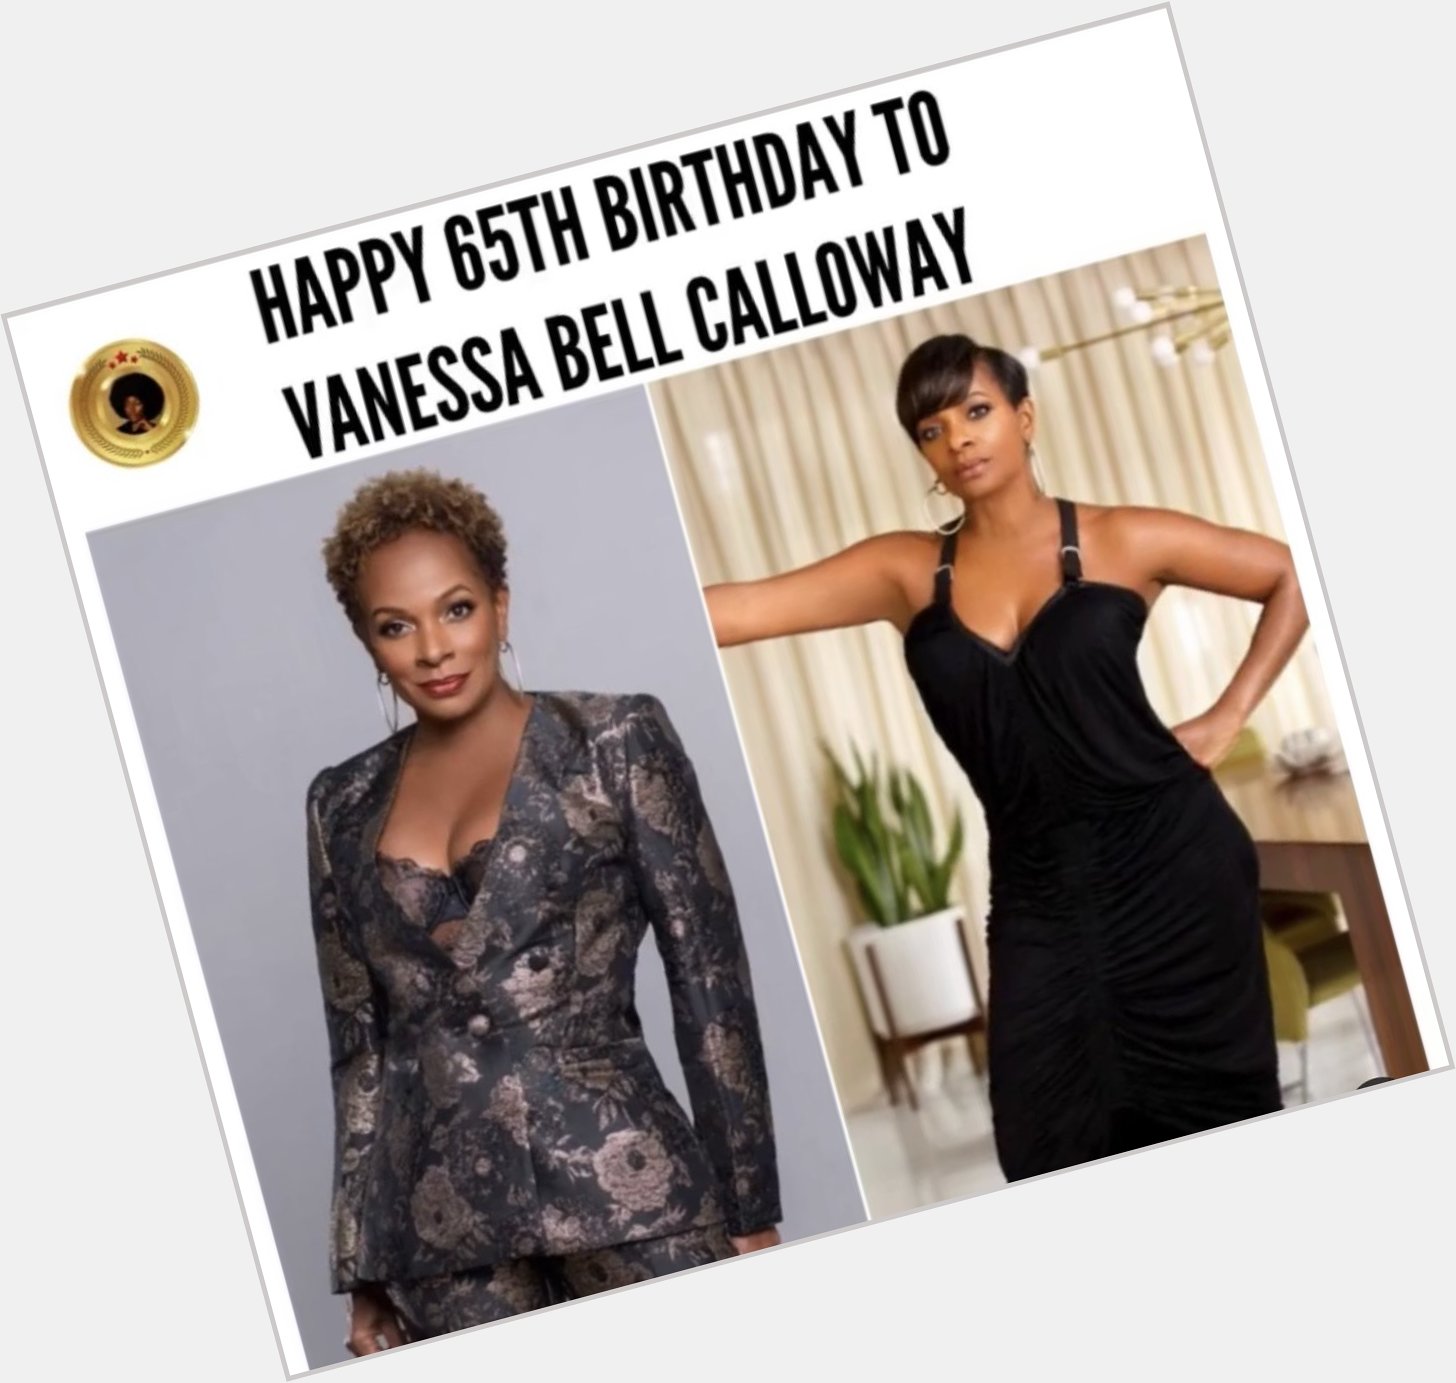 Happy Birthday today to the talented and beautiful Vanessa Bell Calloway  